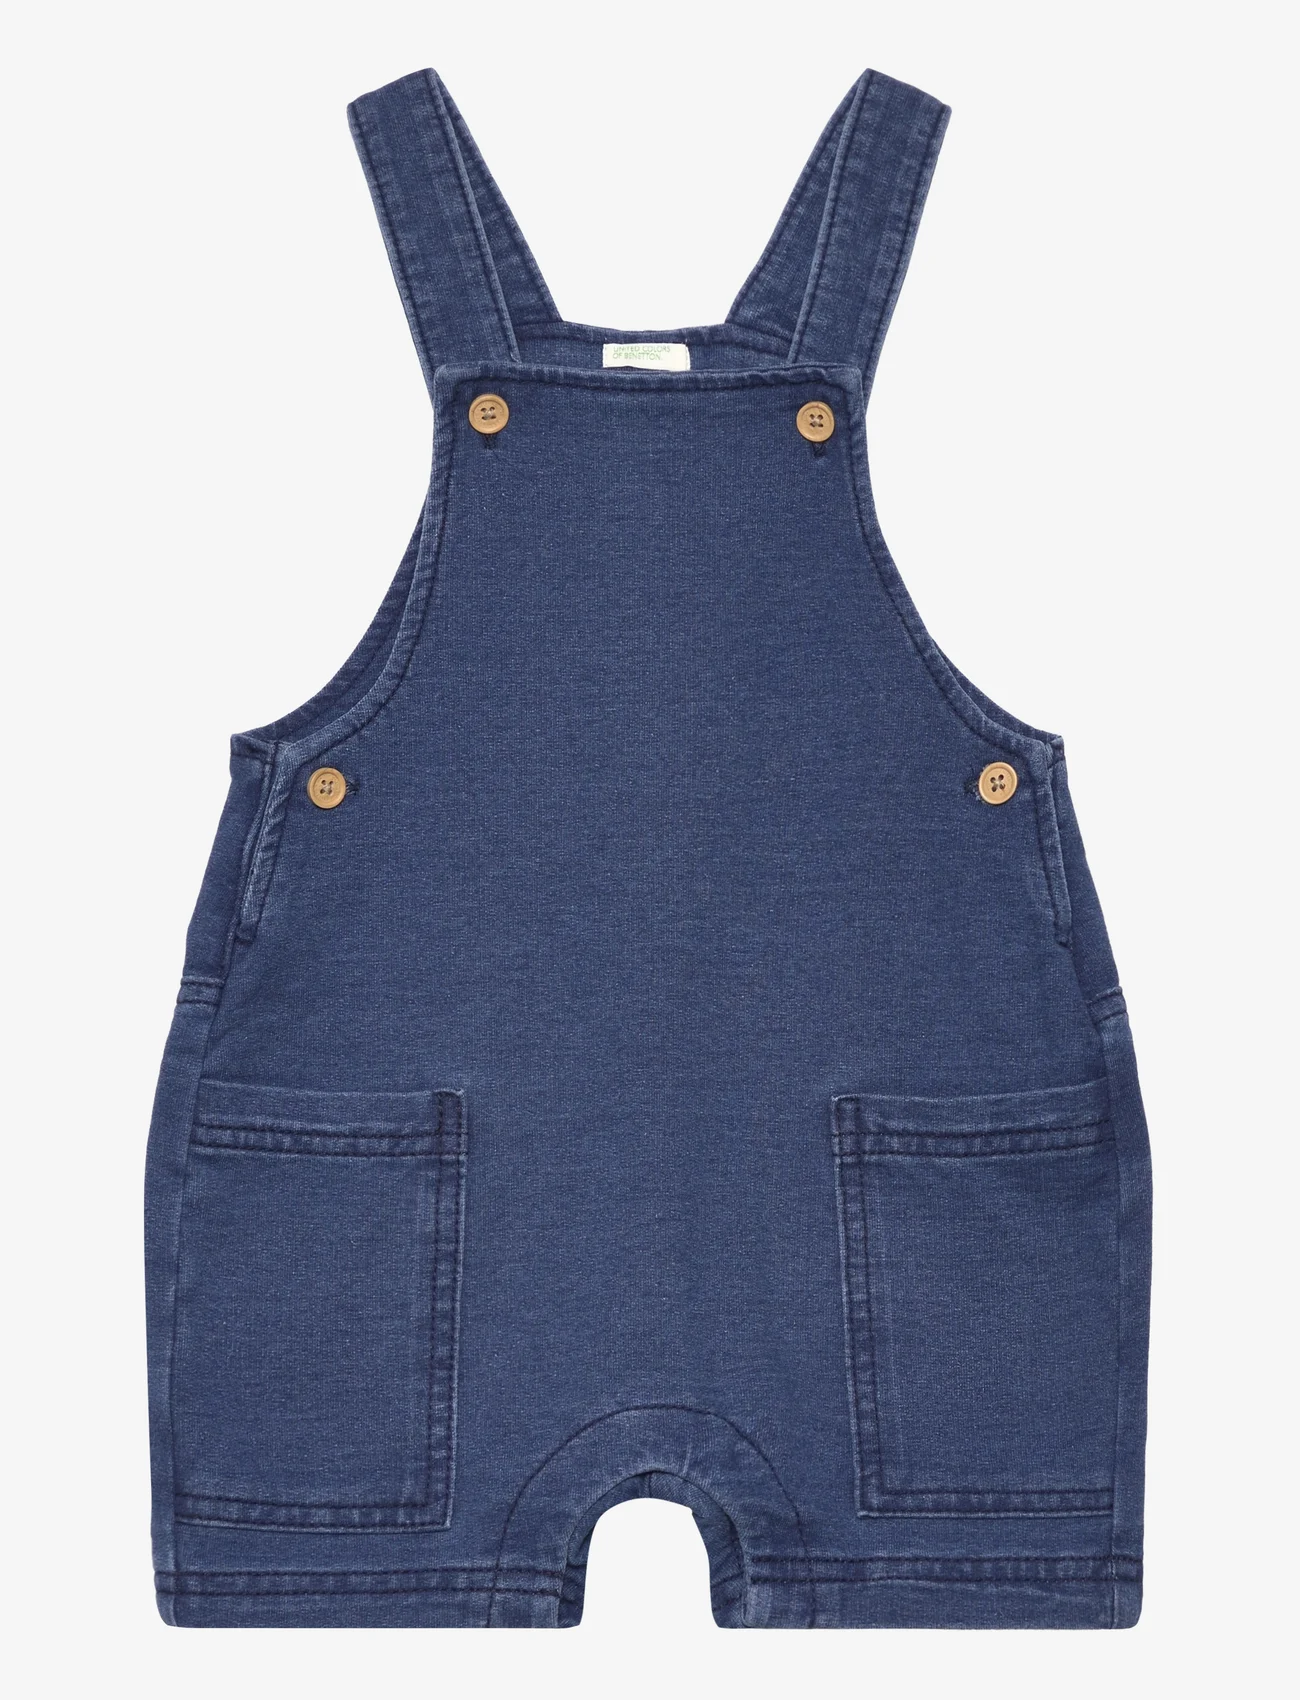 United Colors of Benetton - DUNGAREE - sommarfynd - denim blu - 0